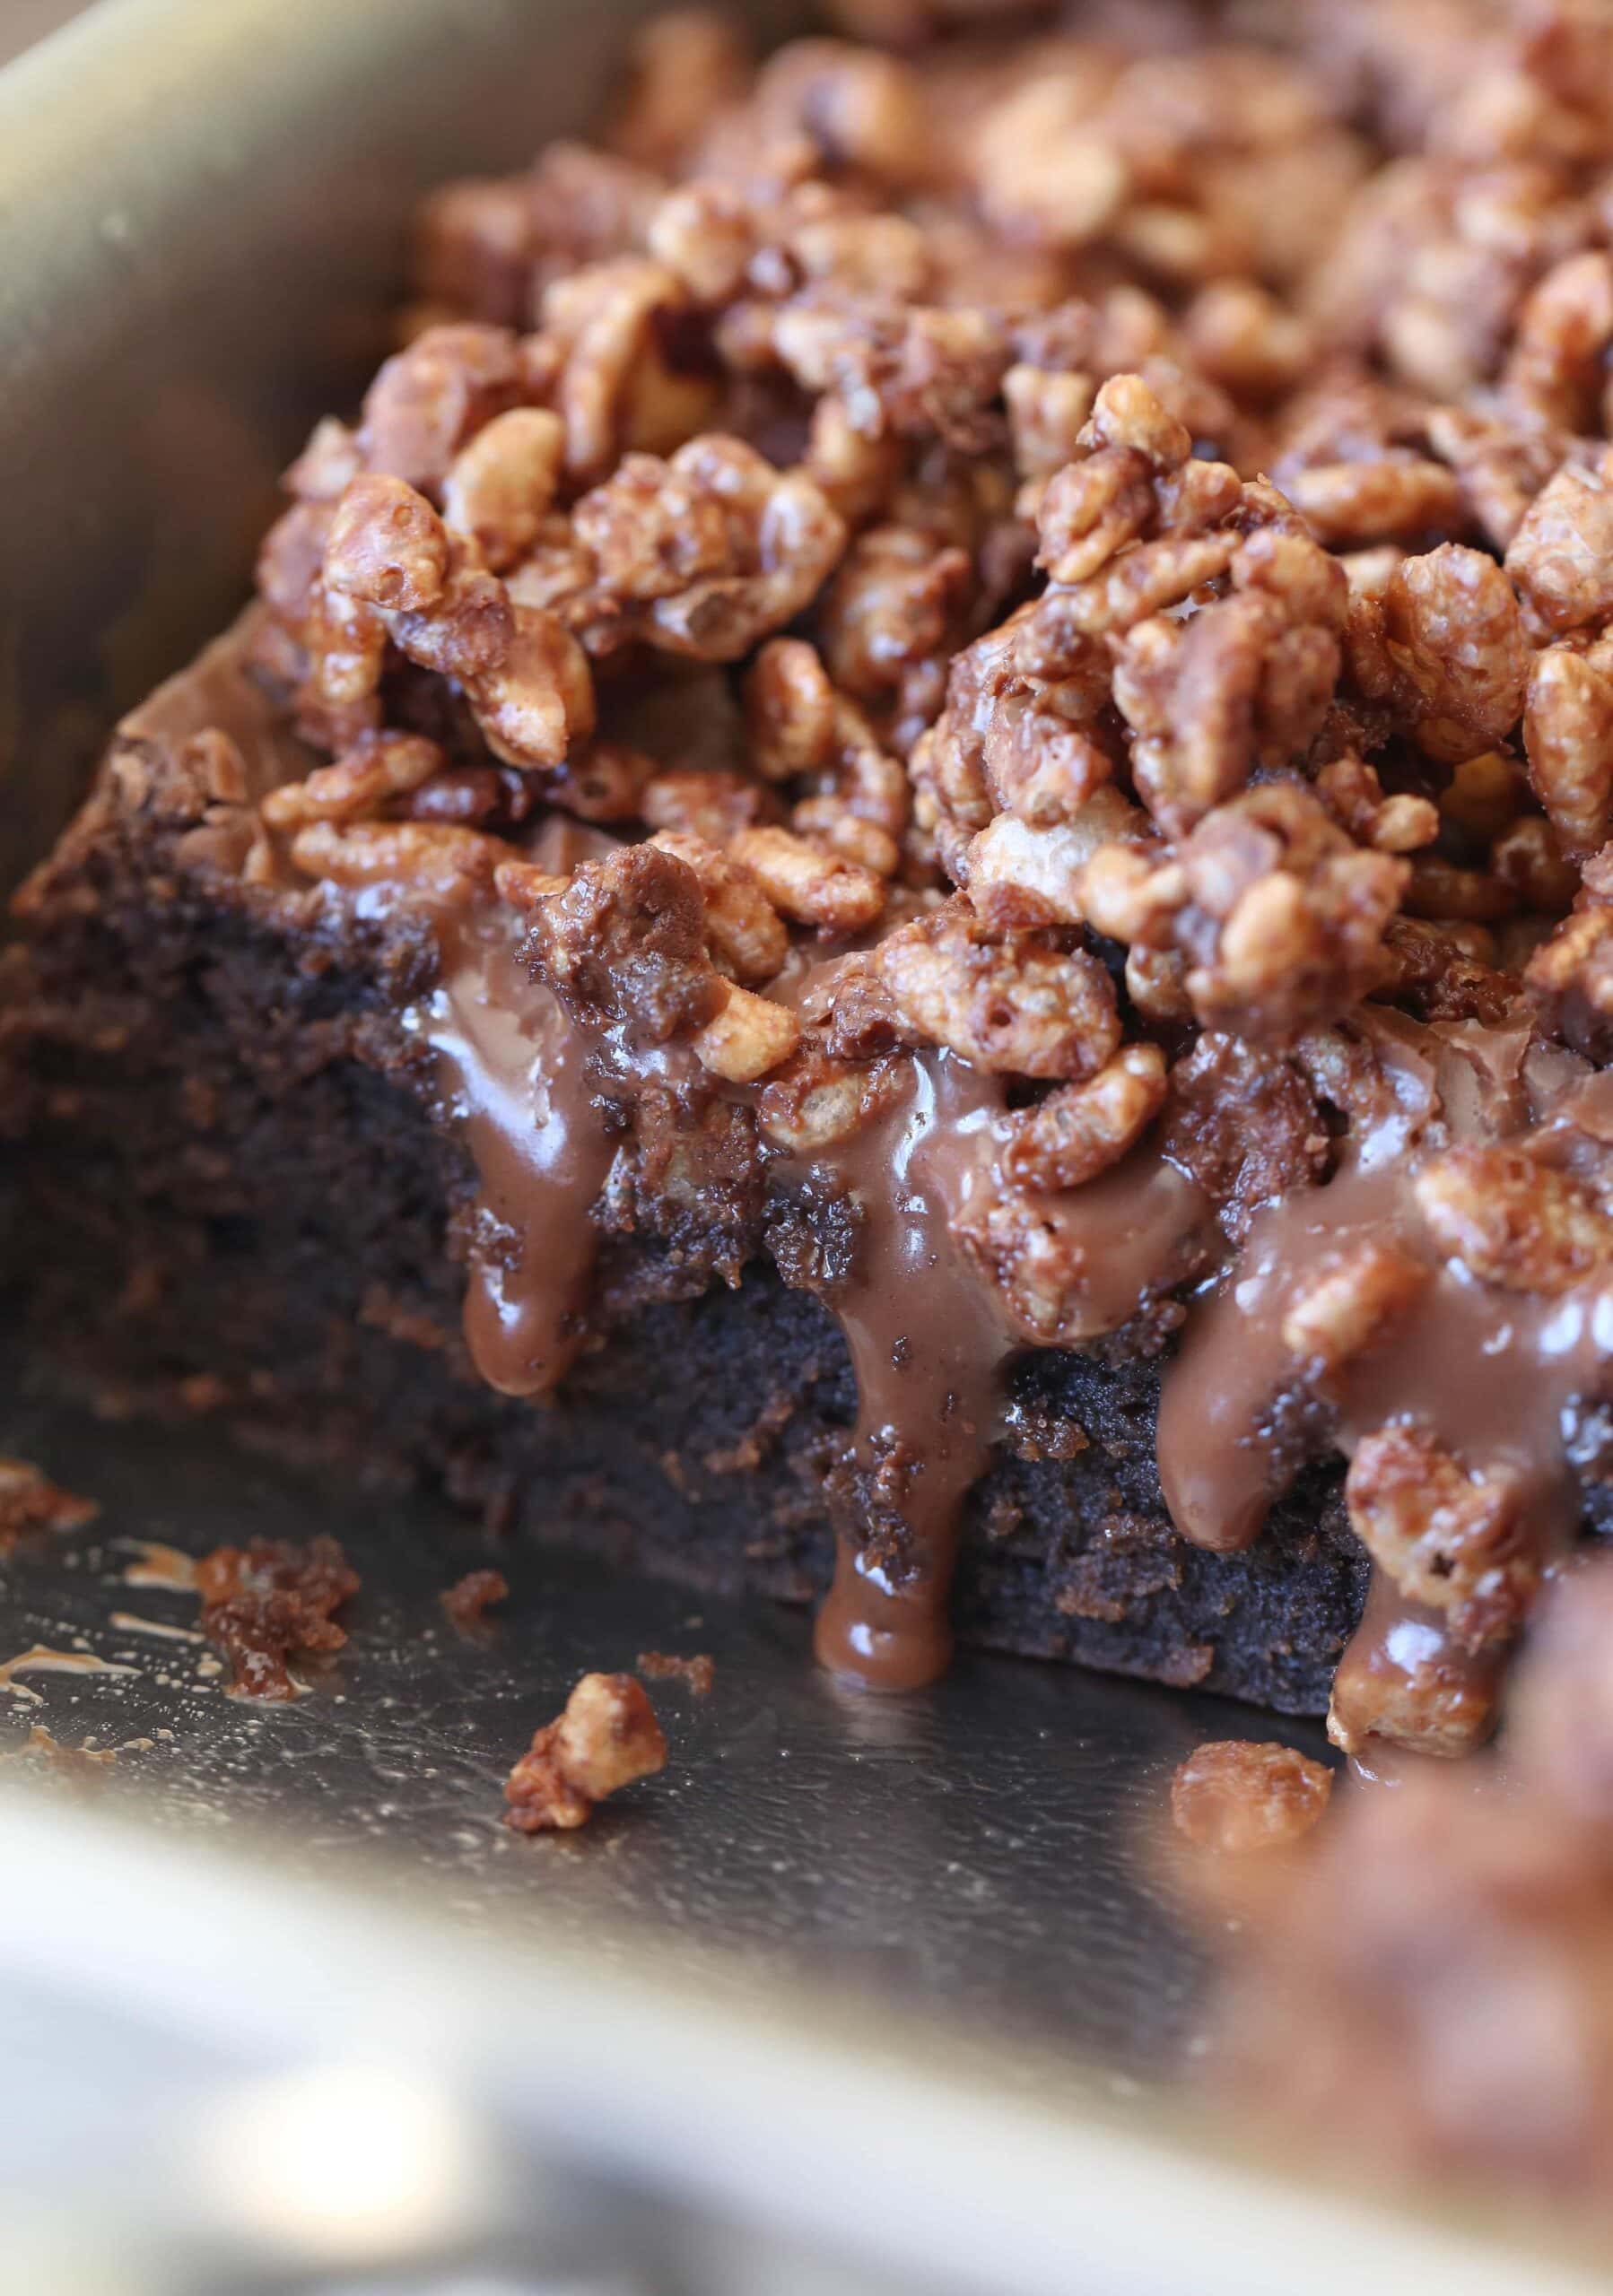 Nutella crunch cake with Nutella topping dripping from under the crunch layer.